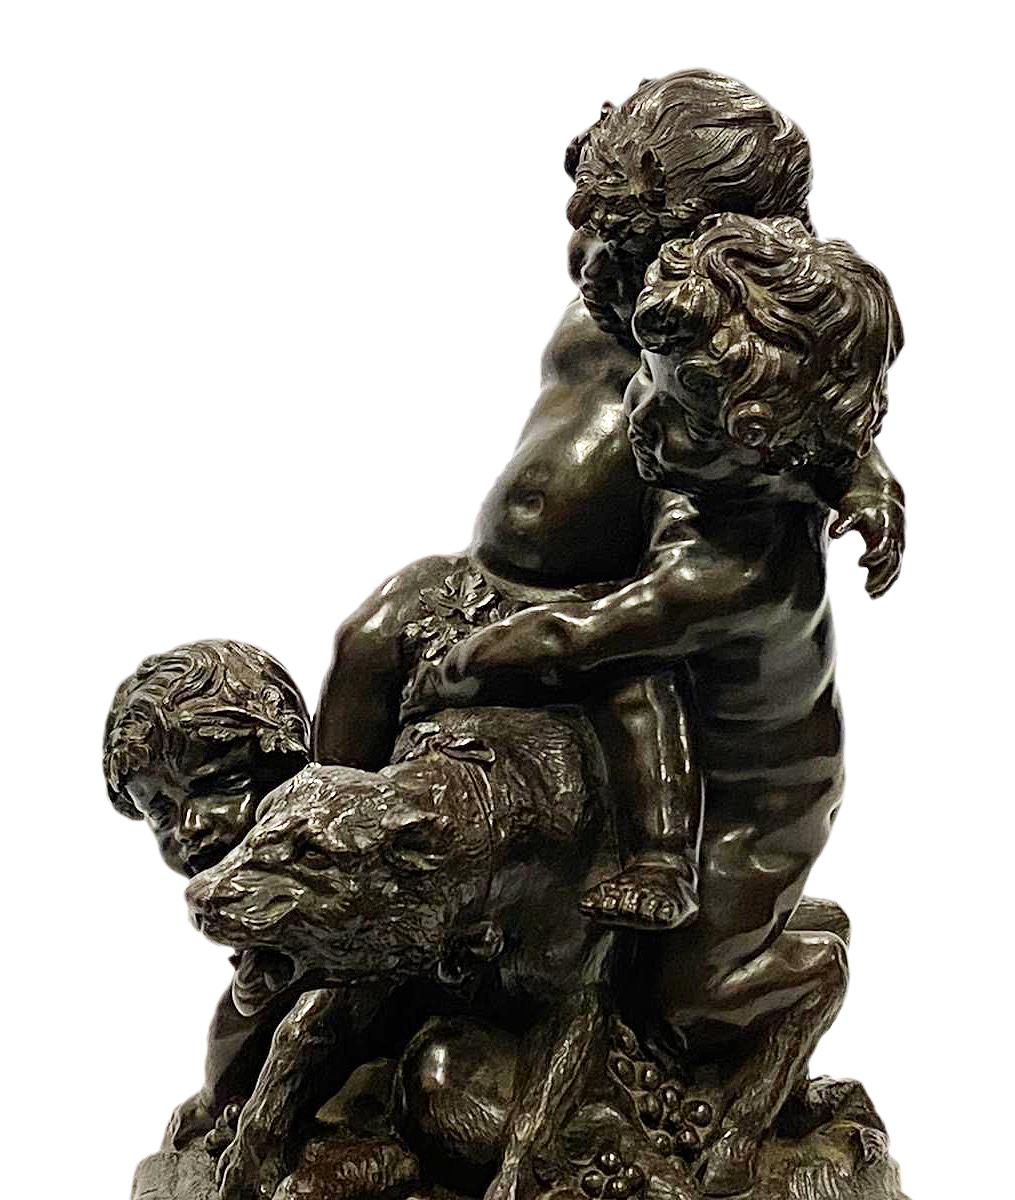 A fine quality 19th century bronze group, depicting three children playing with a Lioness. Measures: 14